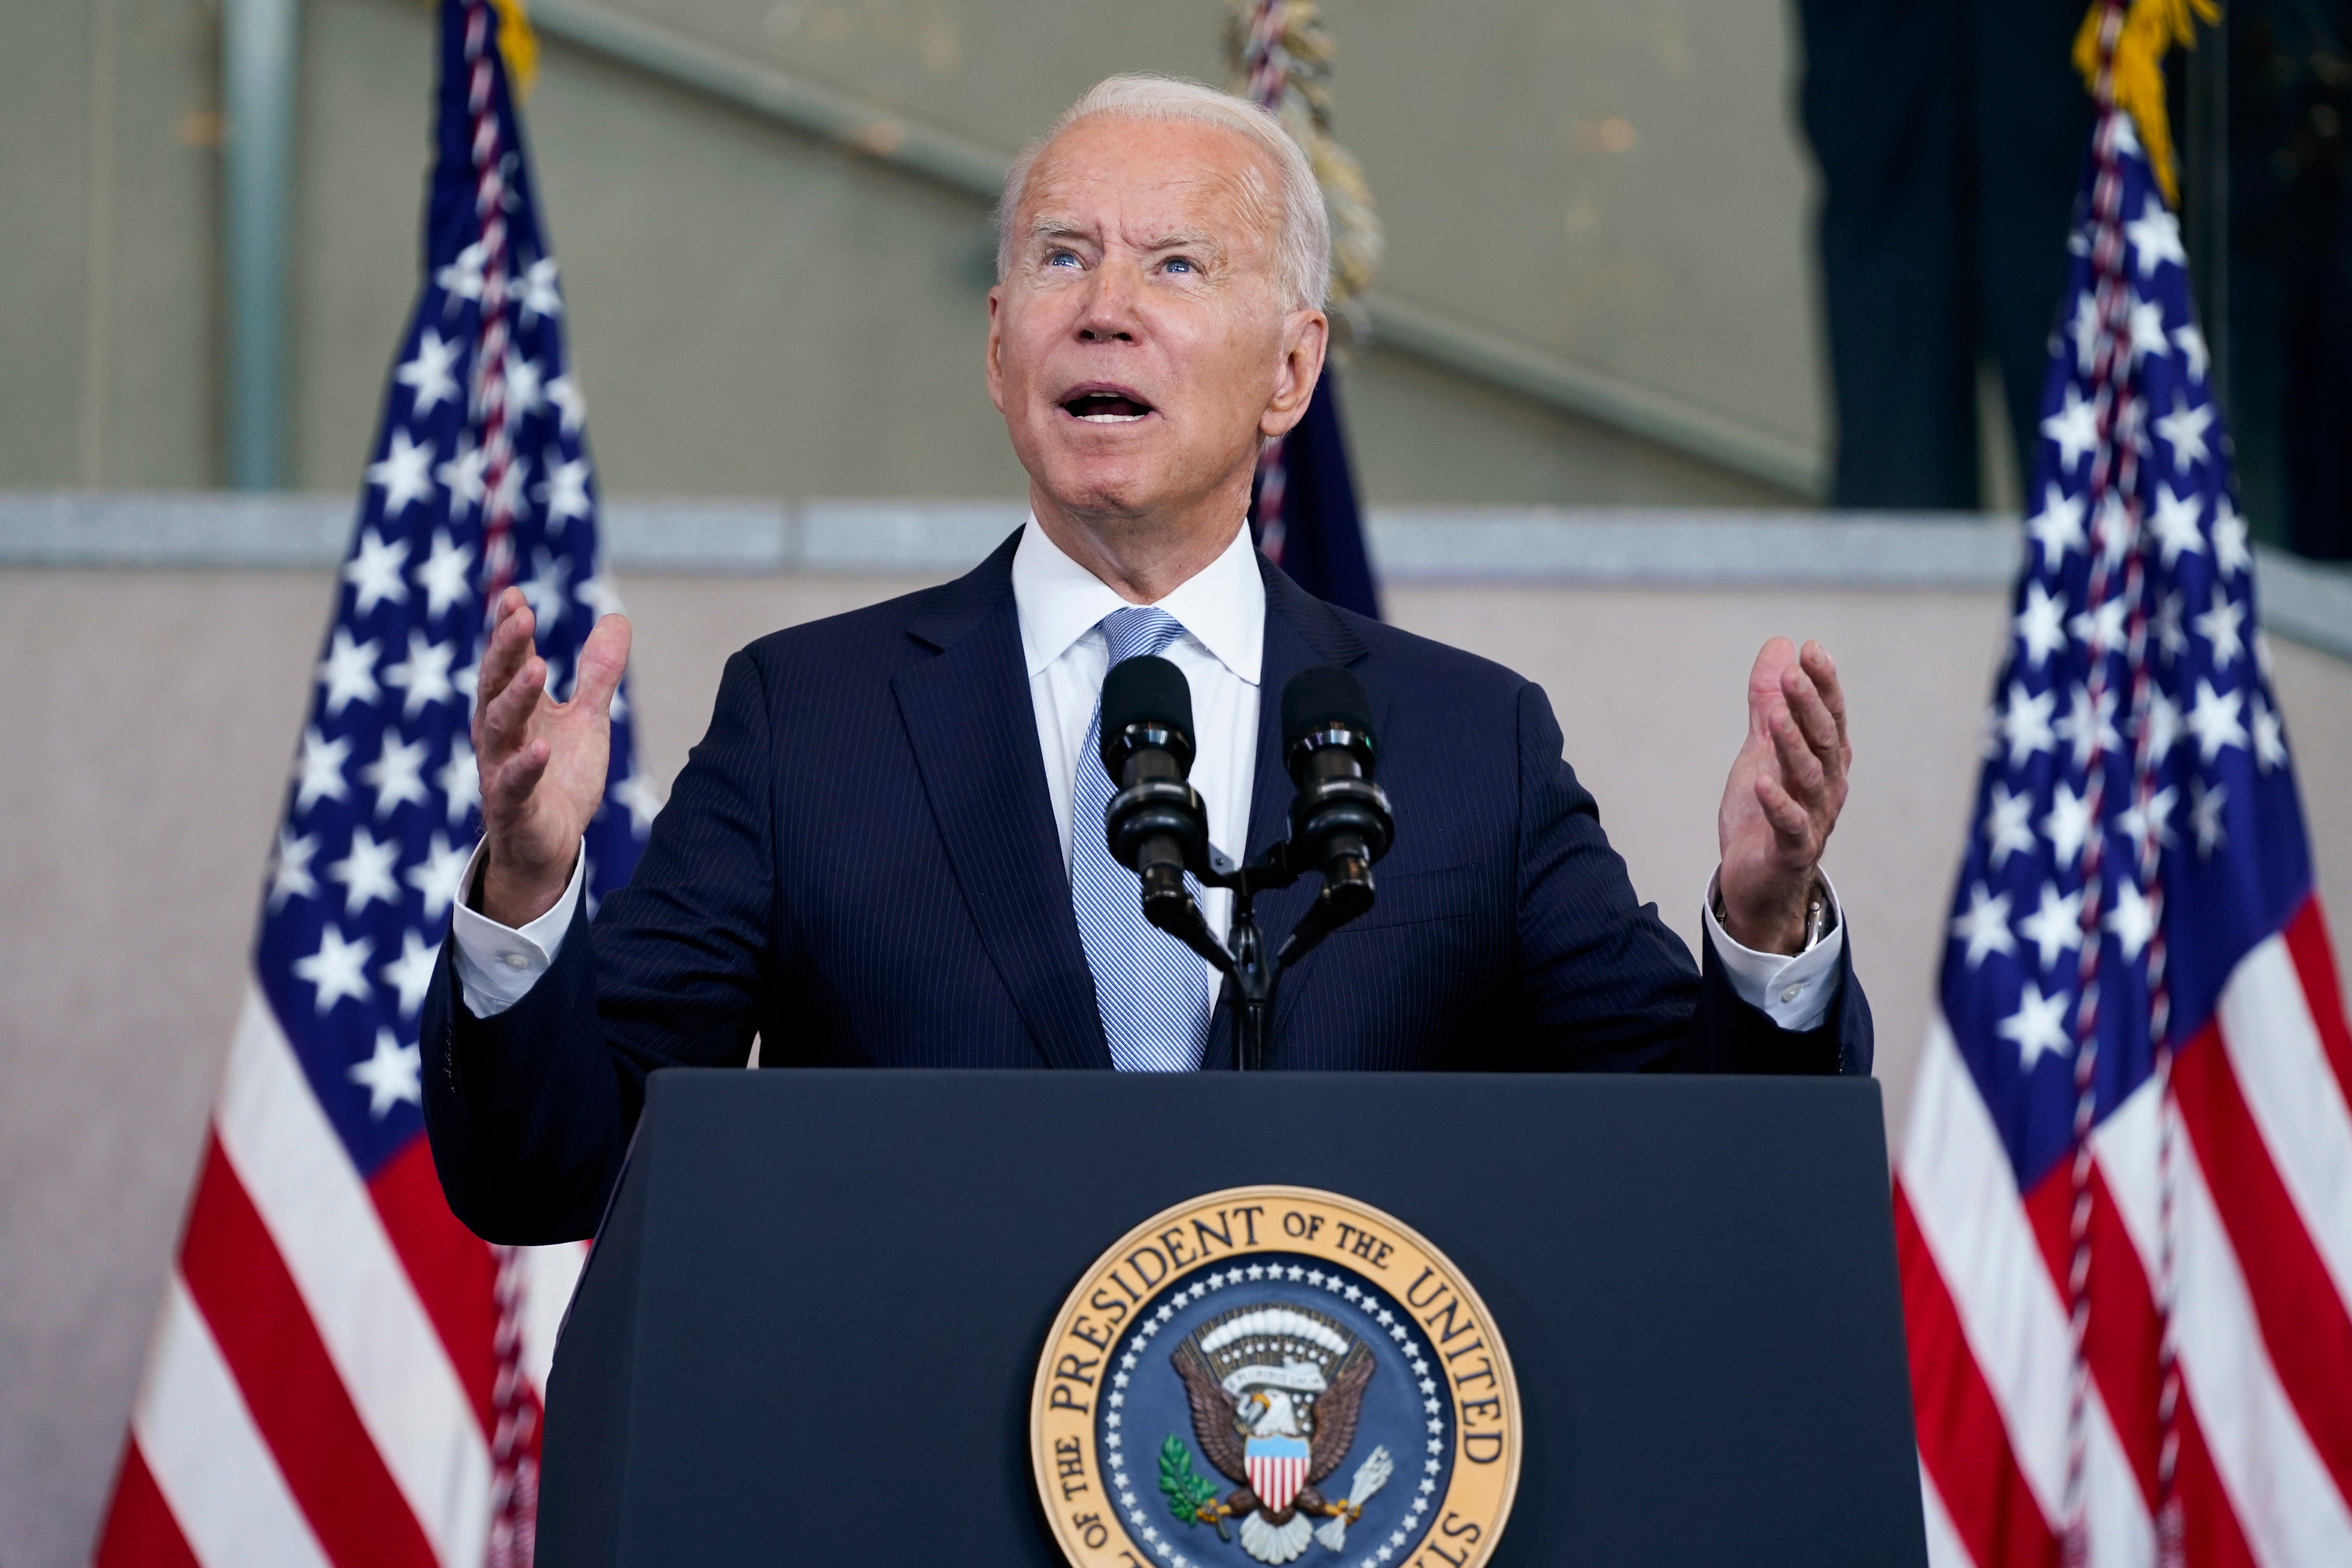 Biden's words on voting rights meet call to action after 1/6 | The ...